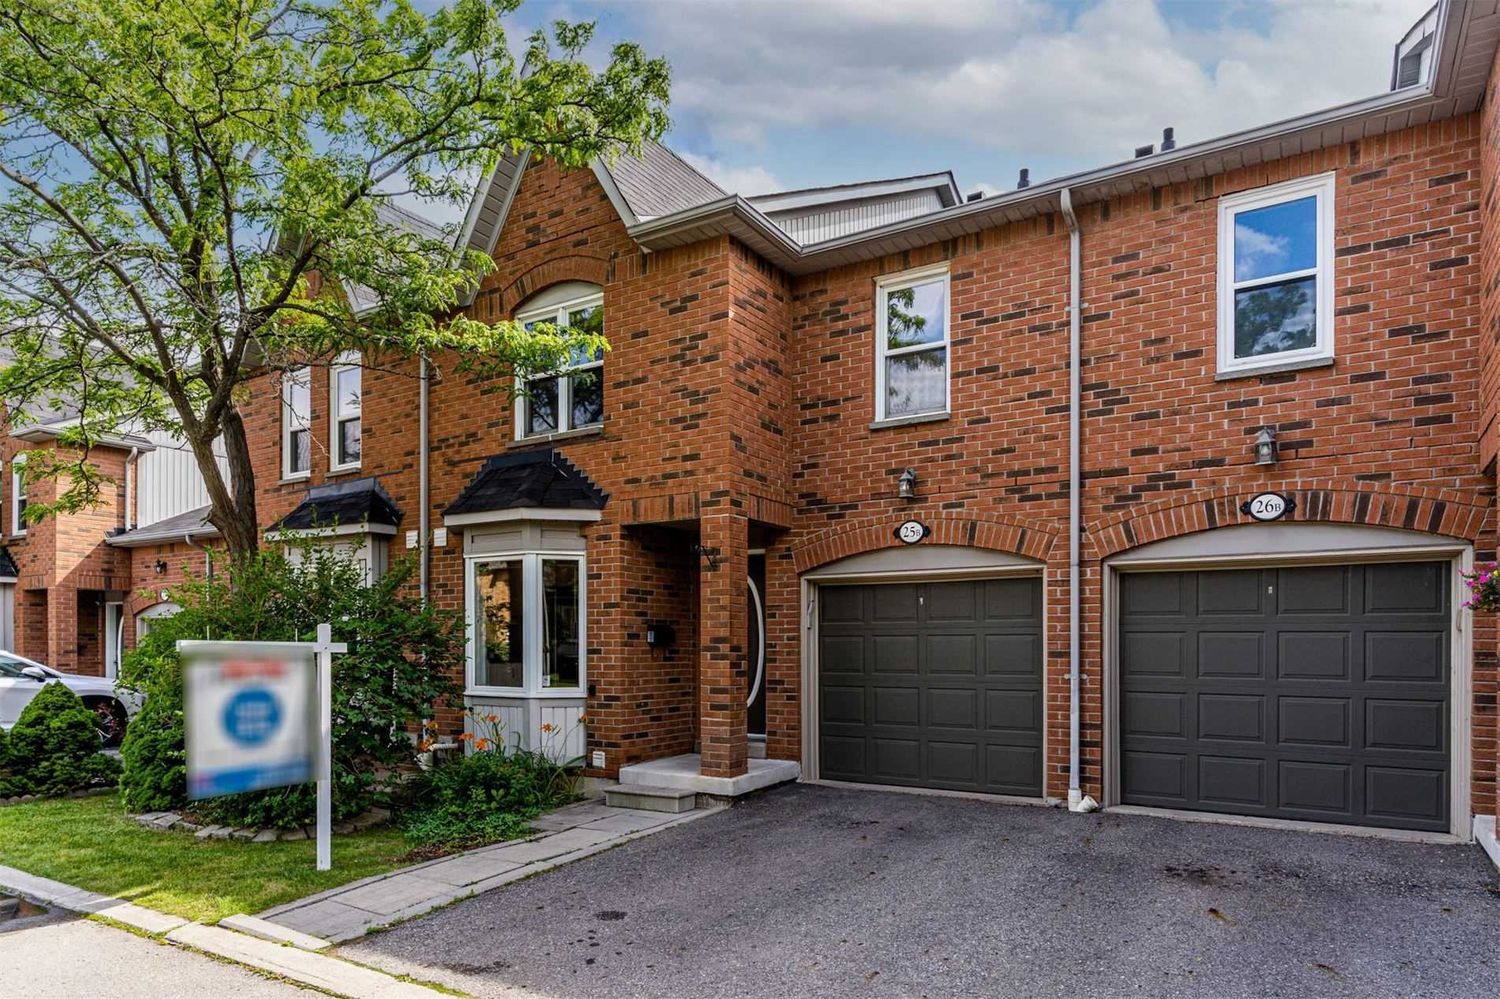 5865 Dalebrook Crescent. 5865 Dalebrook Crescent Townhomes is located in  Mississauga, Toronto - image #1 of 2